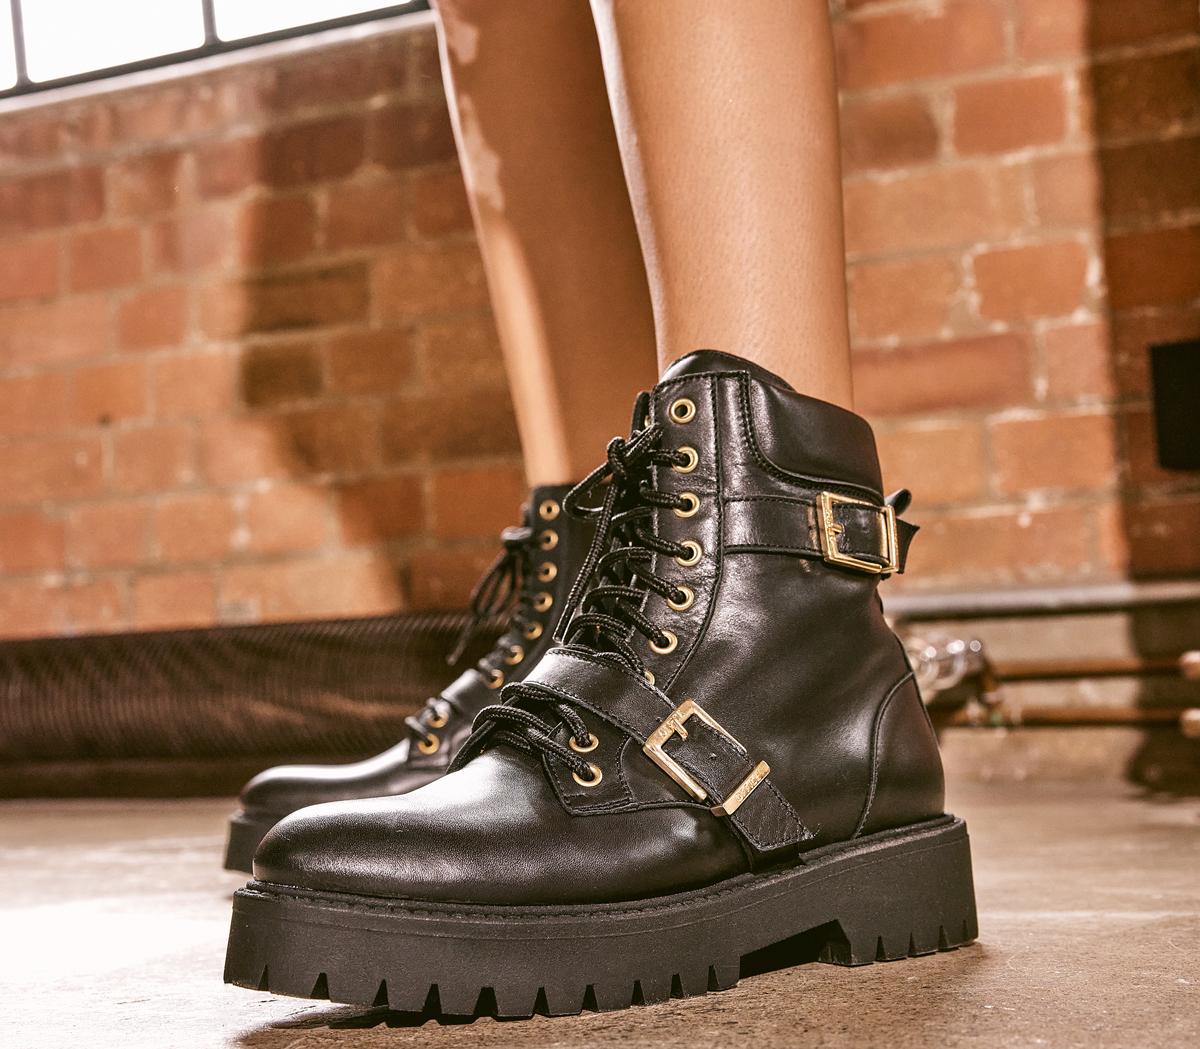 Alive Chunky Sole Lace Up Boots Black Leather